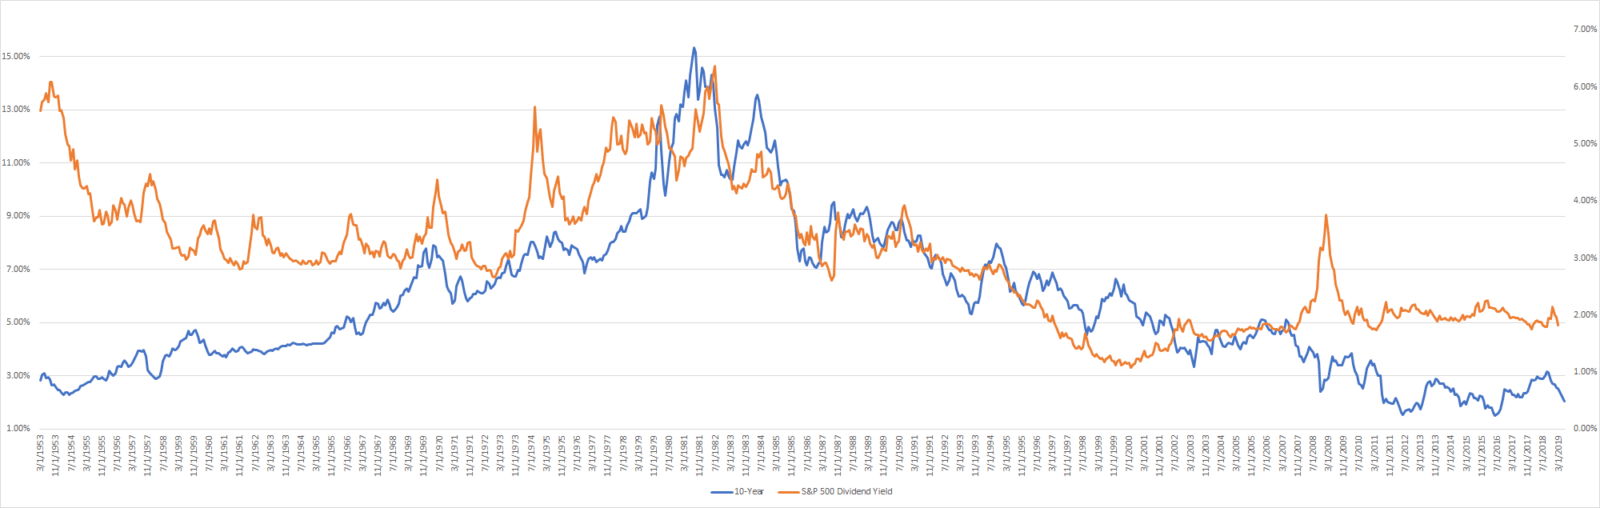 dividend yield and 10-year treasury